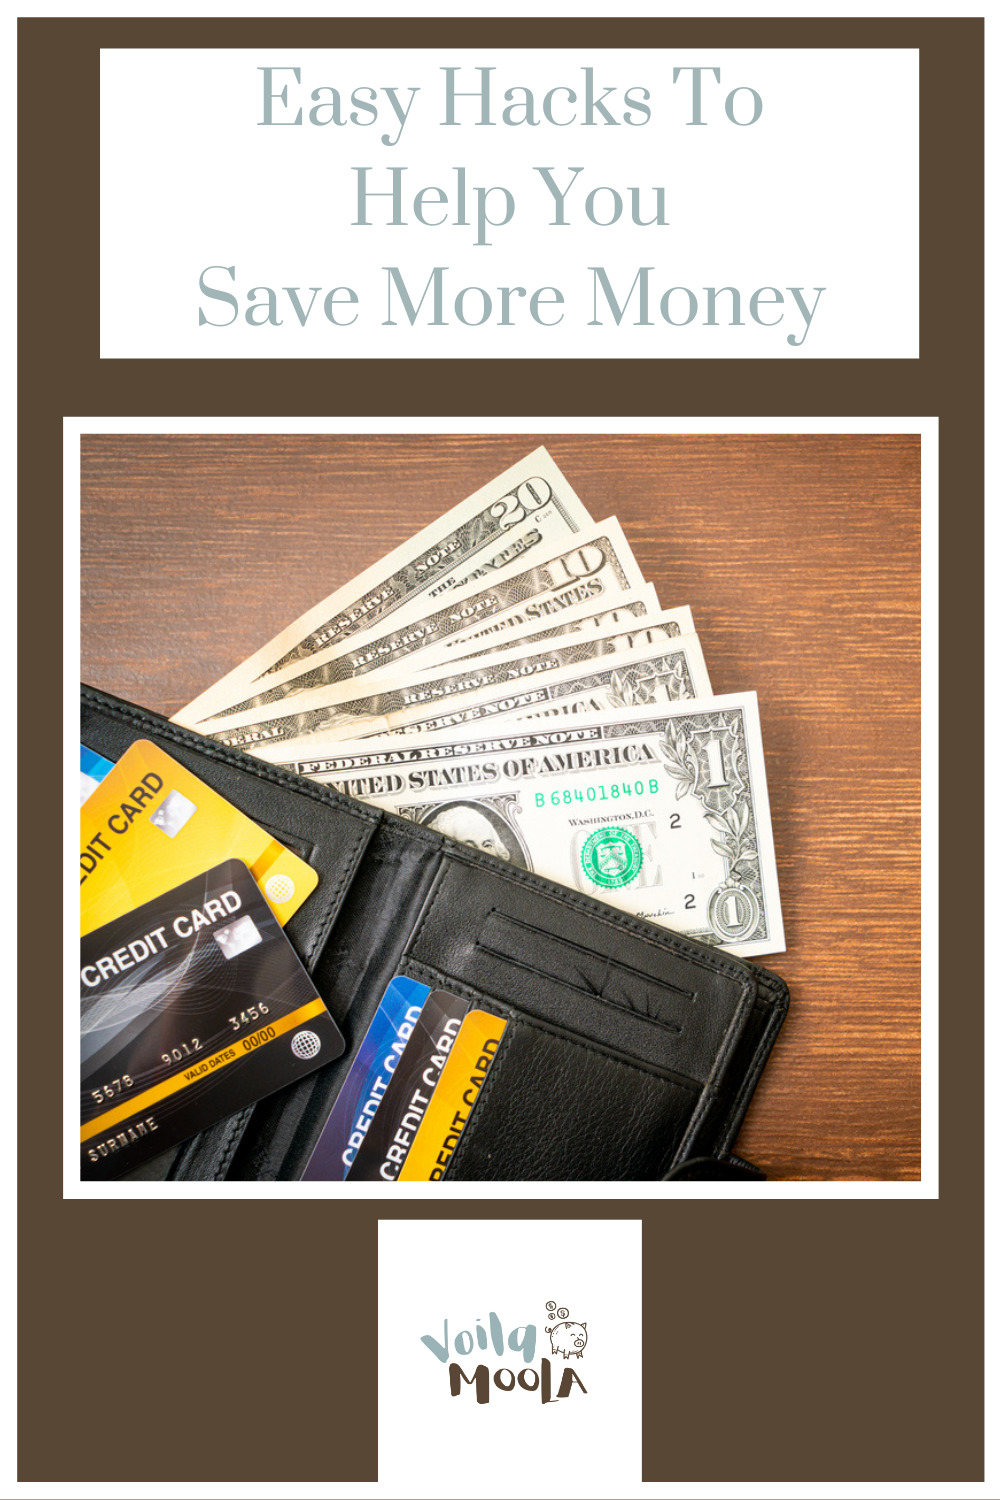 Voilamoola.com will help you save more money than ever before! Find out all the secrets you need to know to become a master saver! Live your life a little more frugally with these easy hacks to help you pocket more cash.